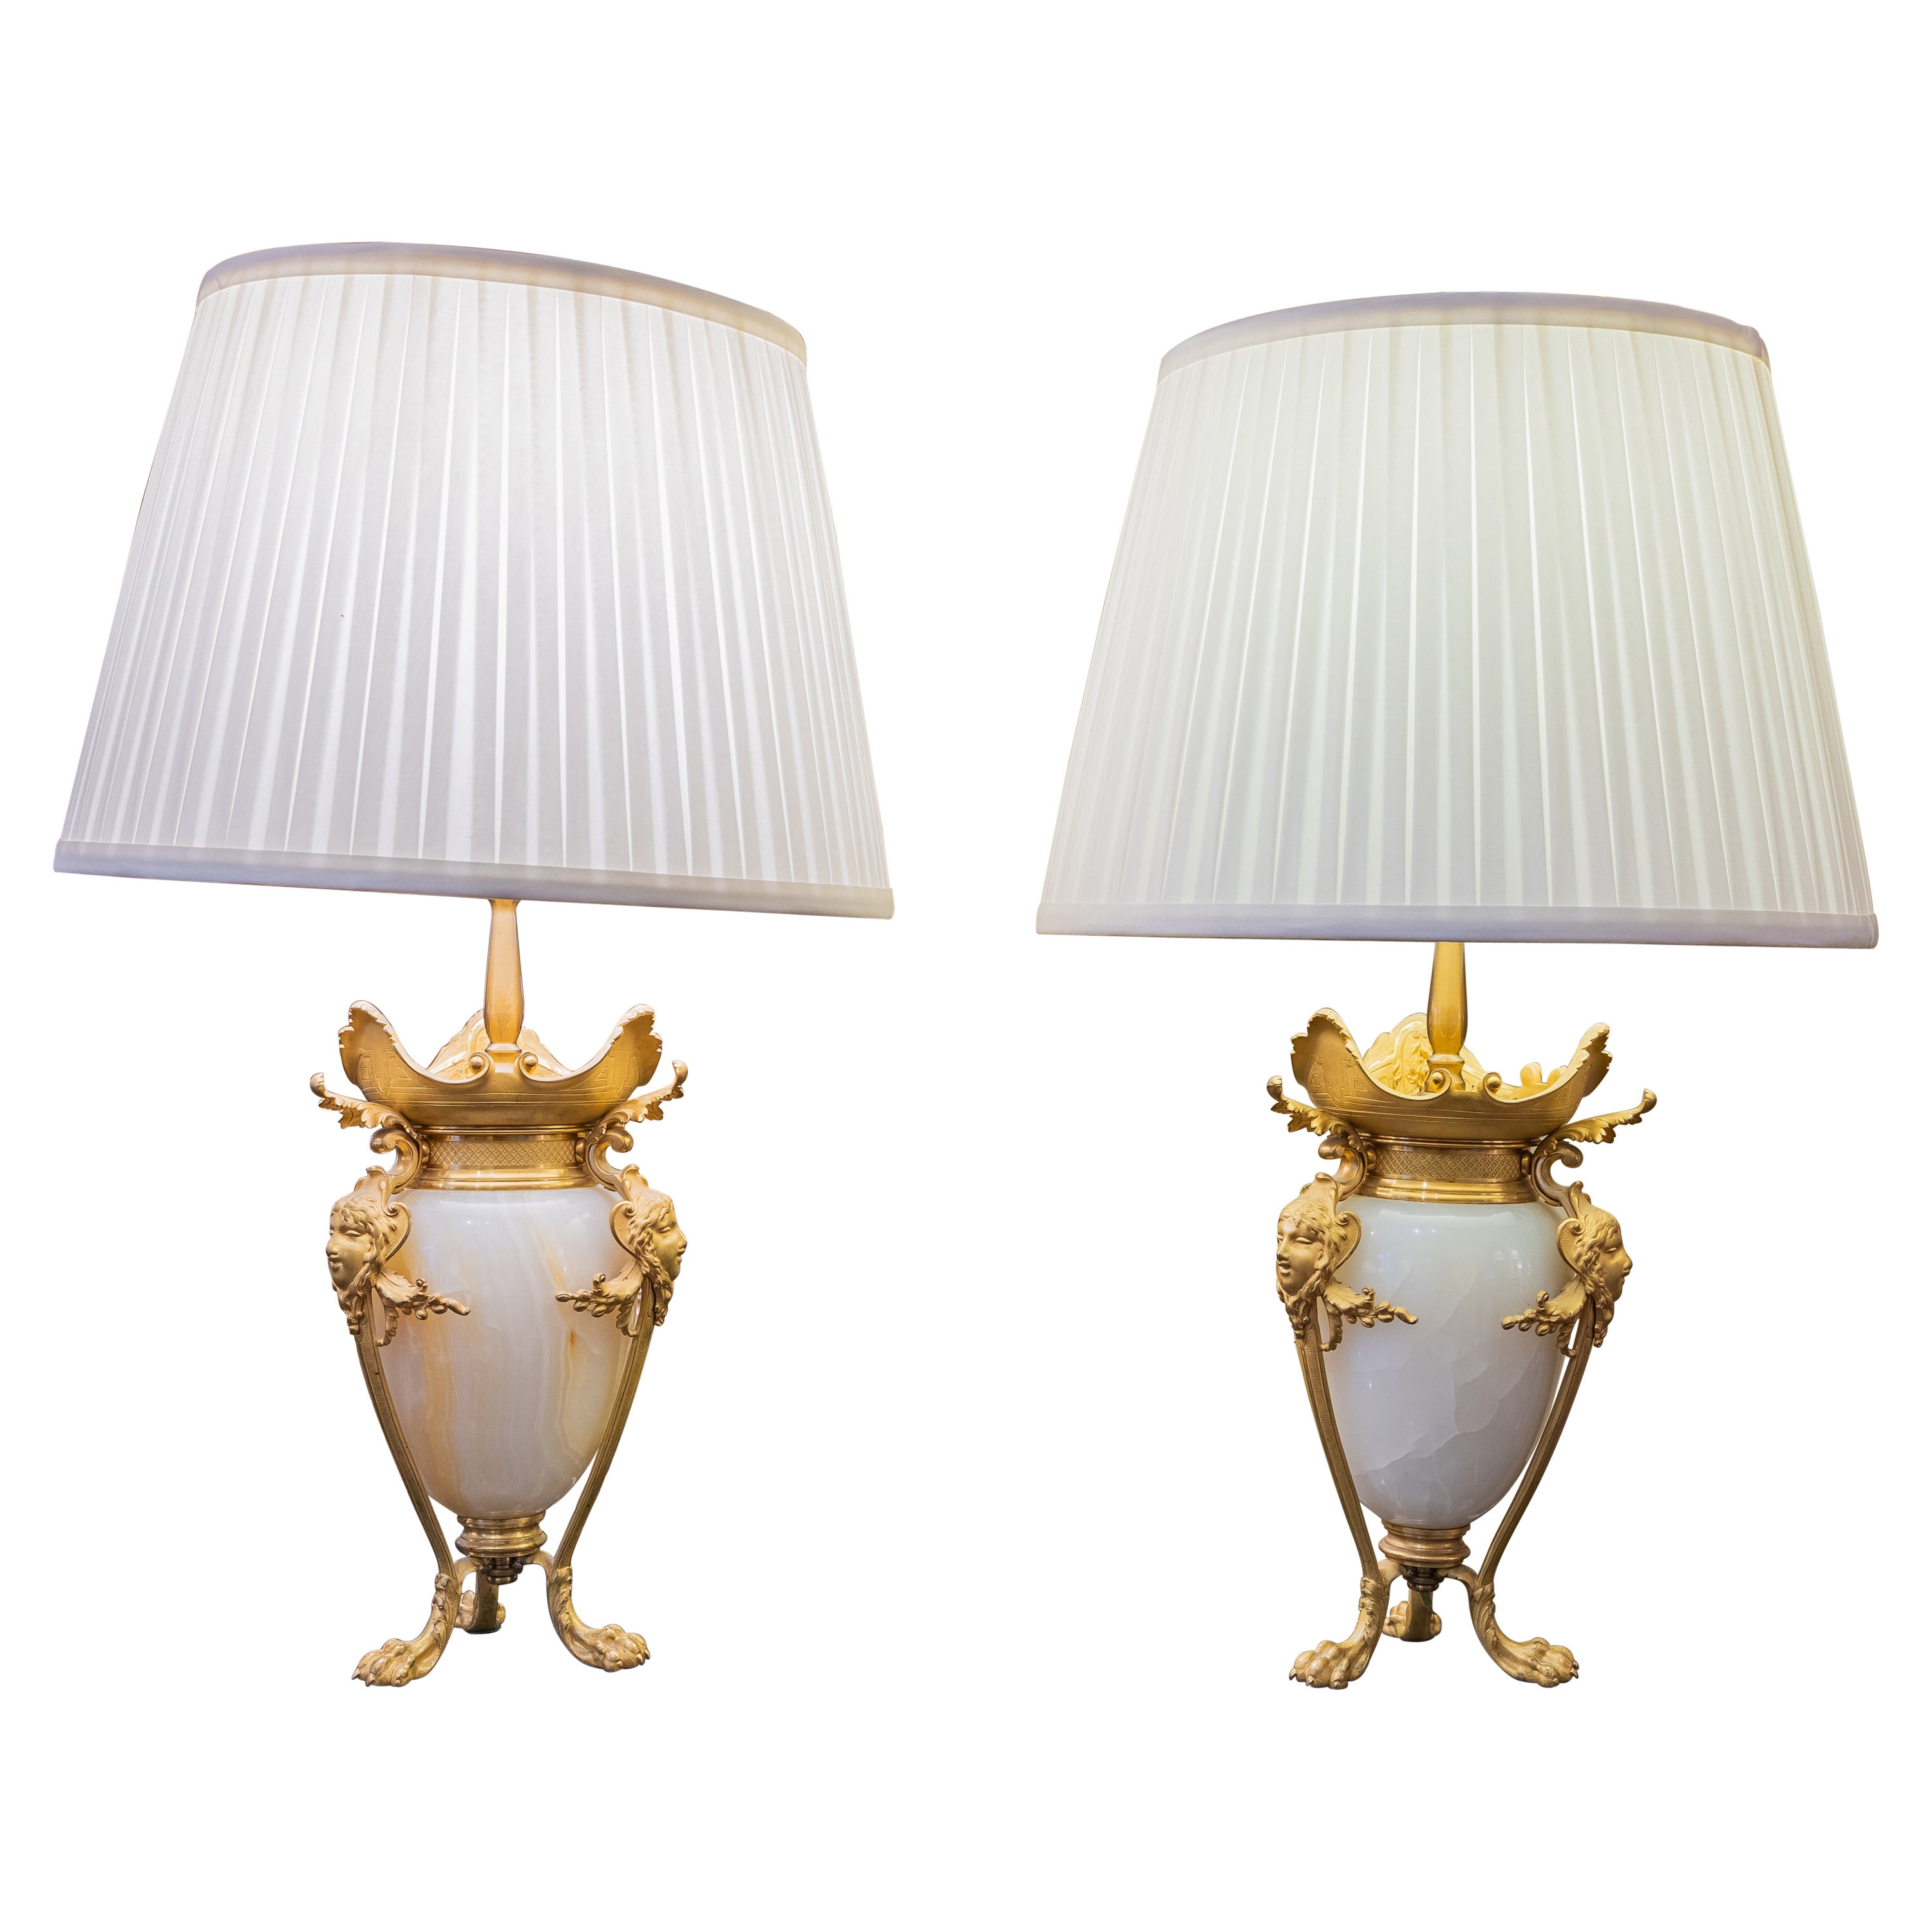 A fine pair of 19th c French alabaster and gilt bronze table lamps